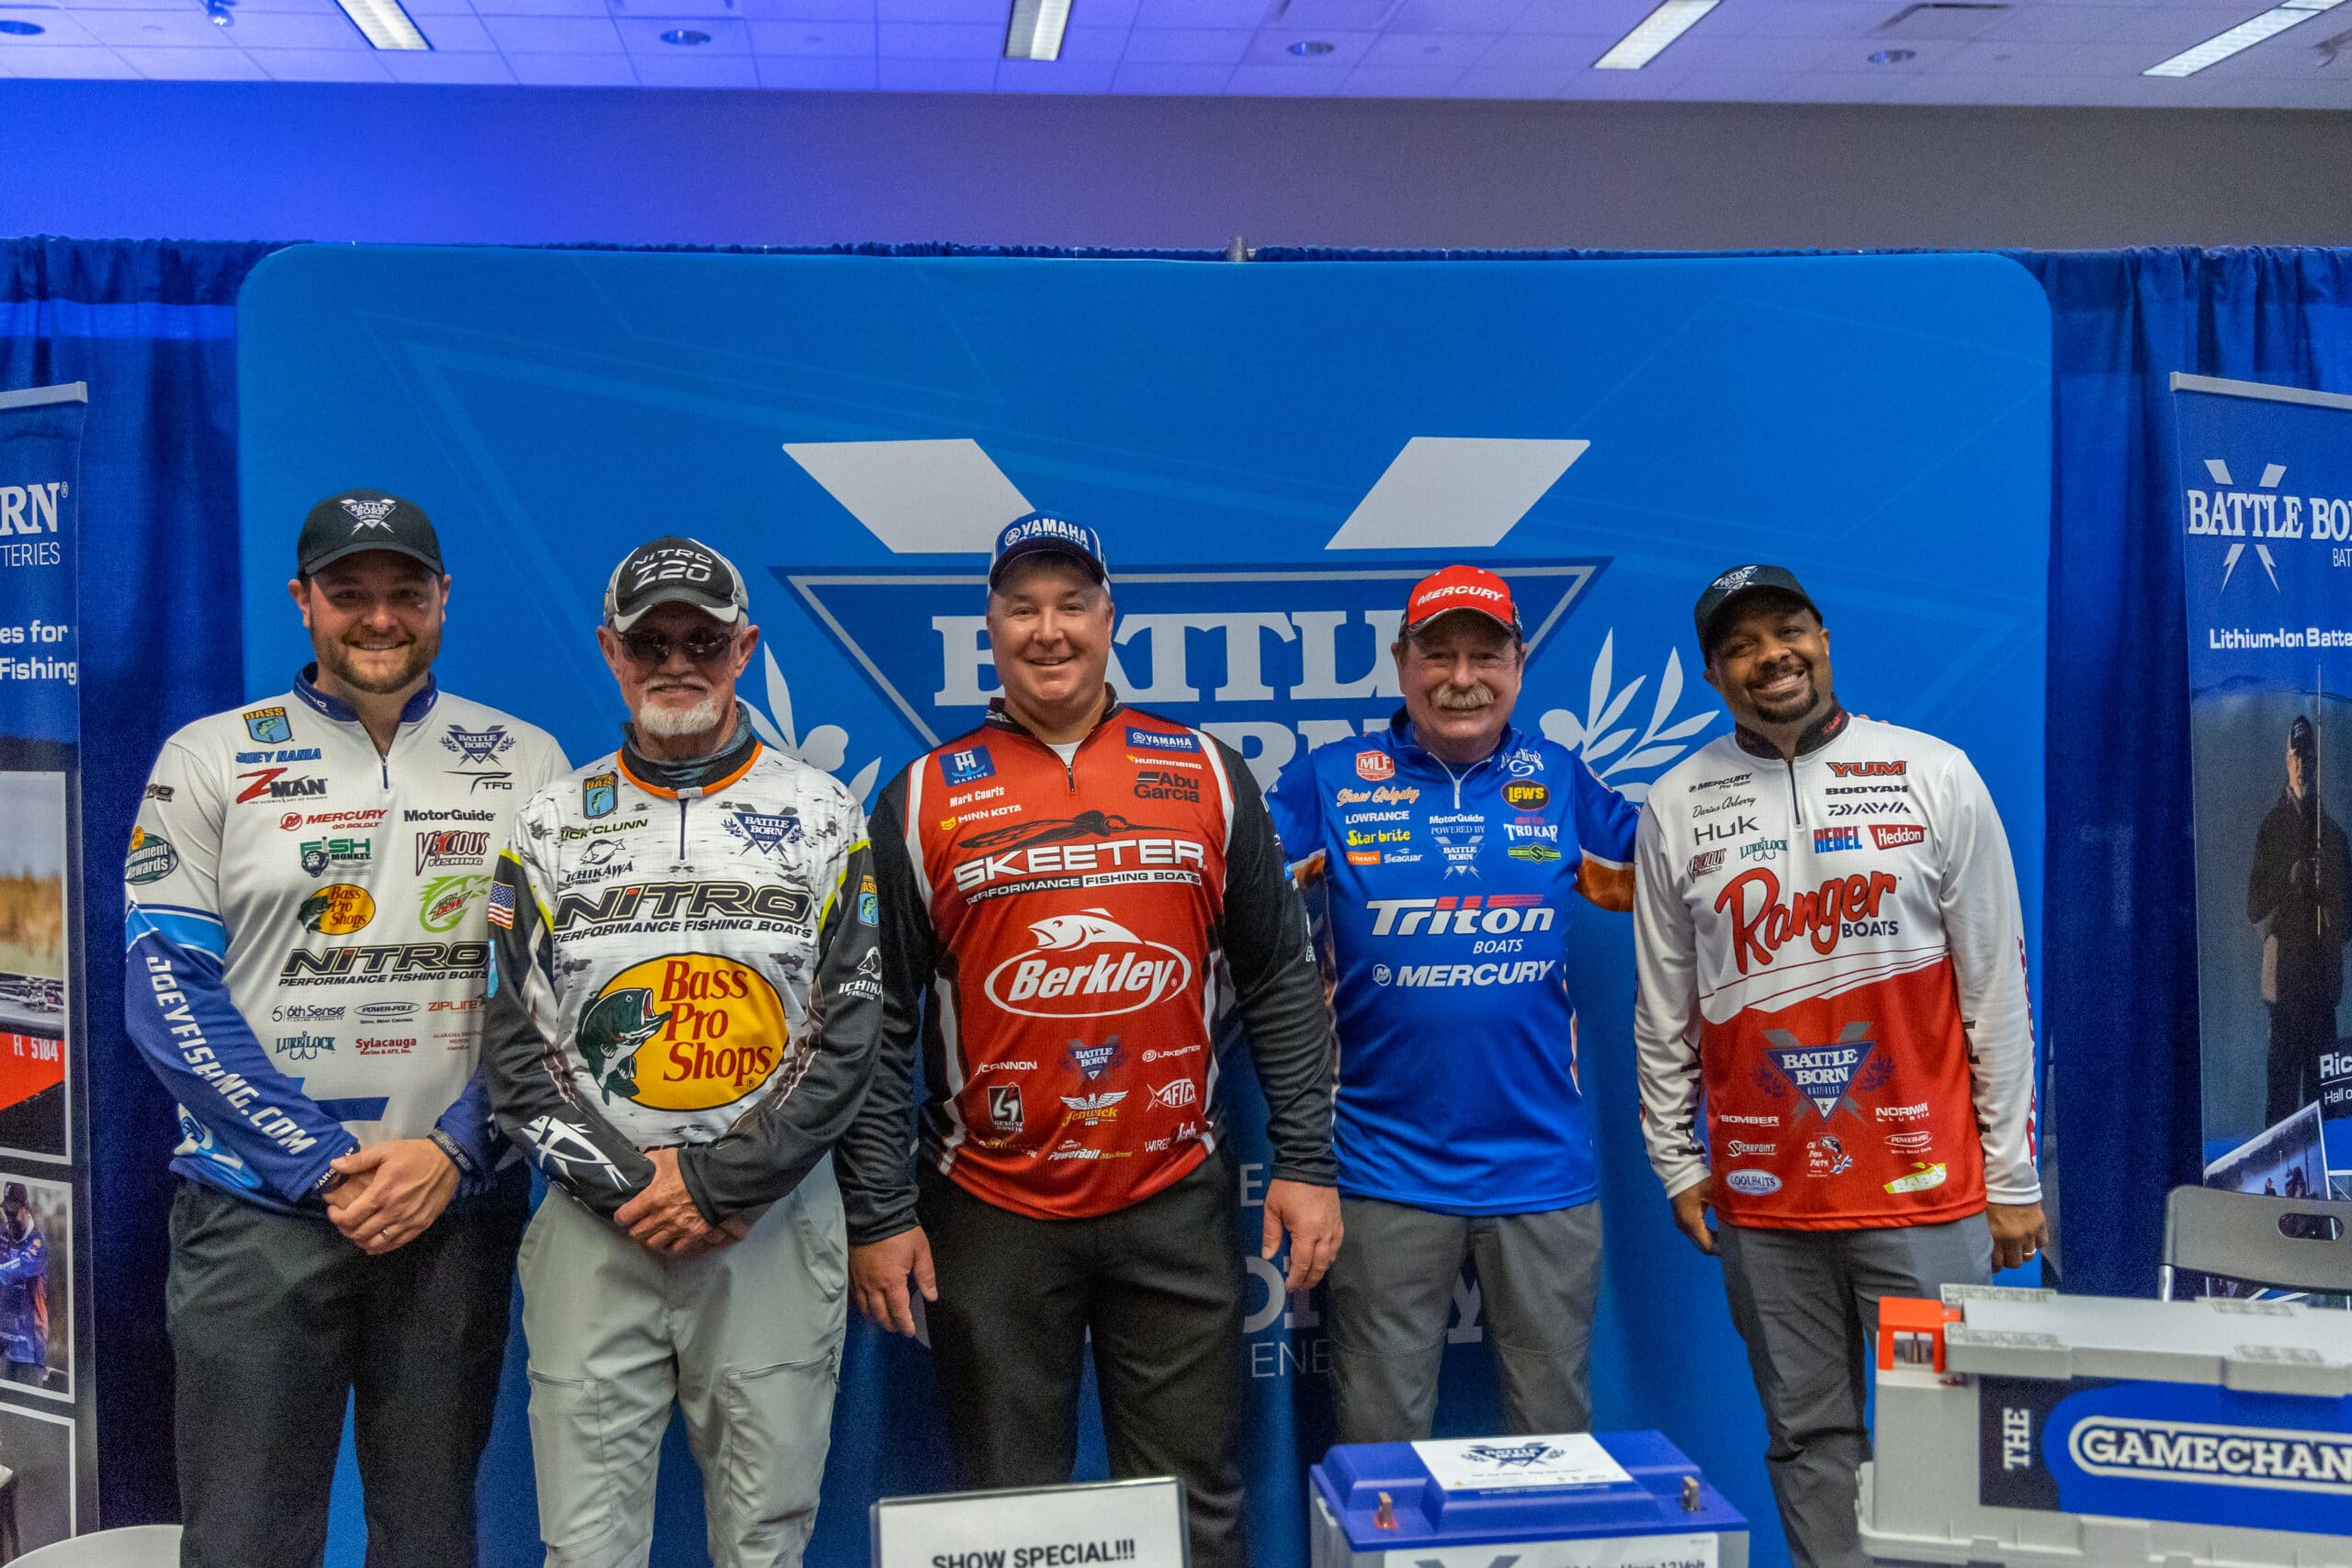 Battle Born Professional Anglers at the Bassmaster Classic